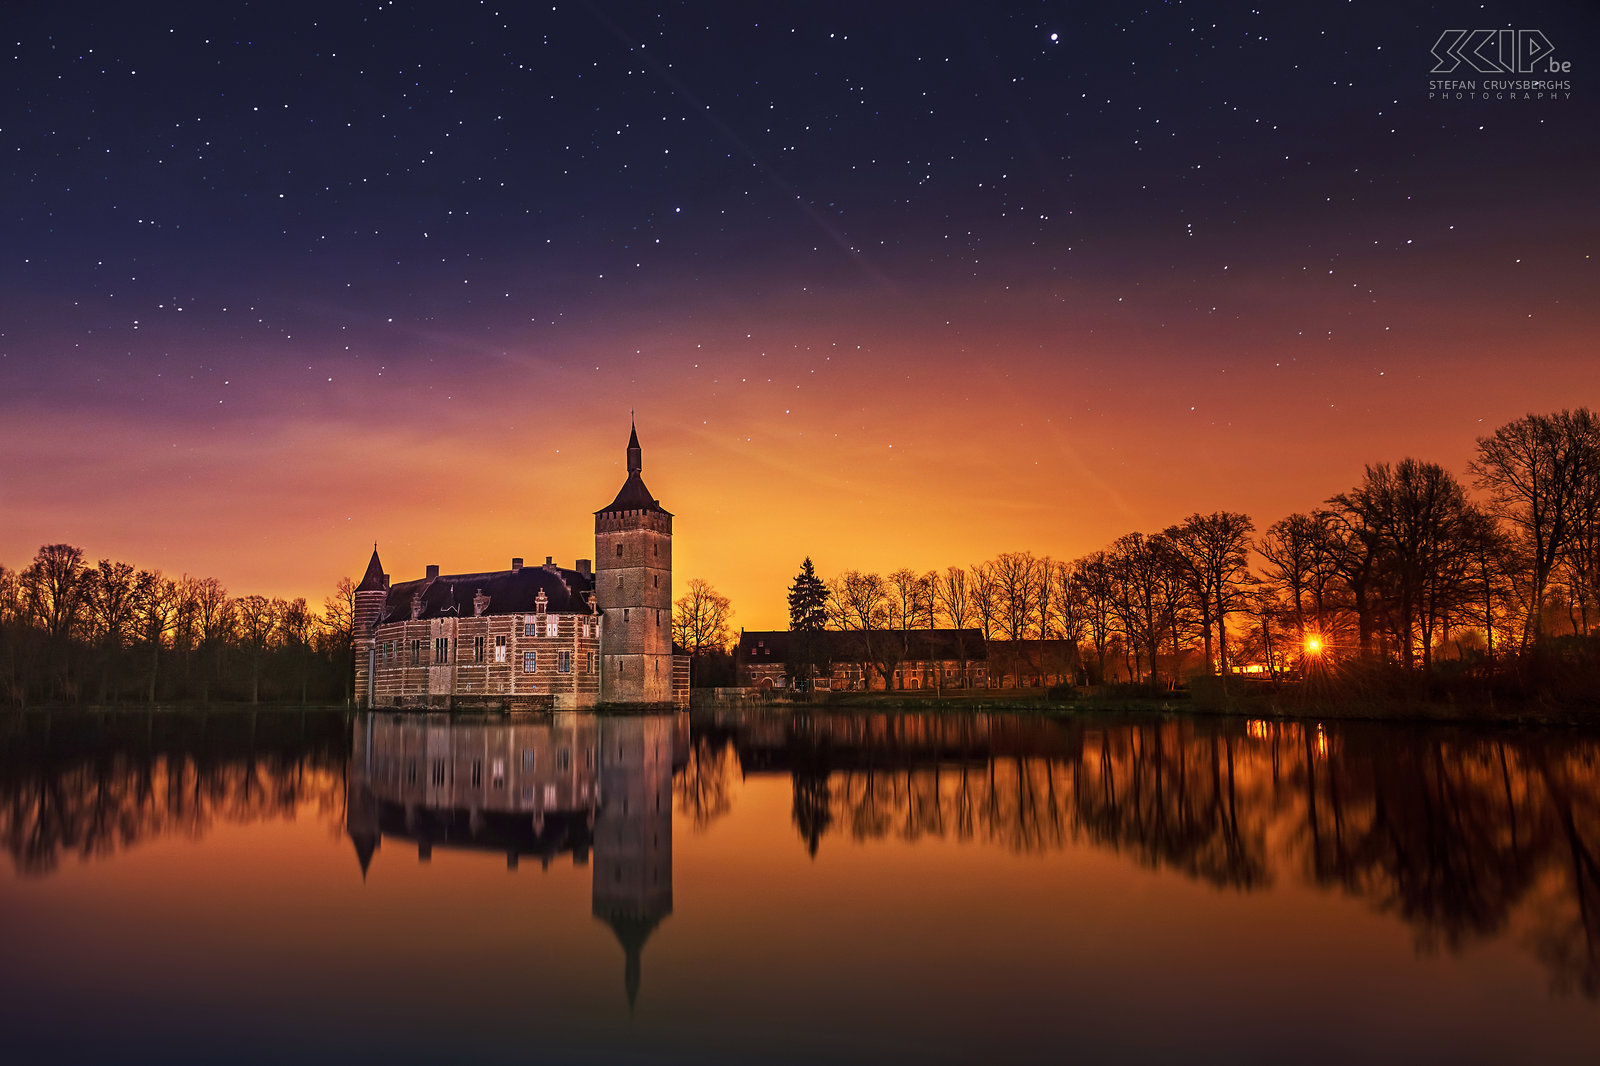 Sint-Pieters-Rode - Castle of Horst by night The castle and the chapel of Horst are photogenic landmarks near my new home. So in recent months I went out to photograph them several times, mostly in the evening and at night or when there were special weather conditions. I tried to create some unique photos of these monuments that differ from the images that already have been captured by many other people.<br />
 <br />
The castle of Horst is located in the village of Sint-Pieters-Rode (Holsbeek, Belgium). The castle was built in the mid-14th century and is still quite authentic. The former living rooms, made of brick and sandstone, are mostly from the 16th and 17th centuries. Under an old lime tree in the middle of the fields nearby the castle the Saint Joseph's chapel is located.It dates from the early 19th century.<br />
 Stefan Cruysberghs